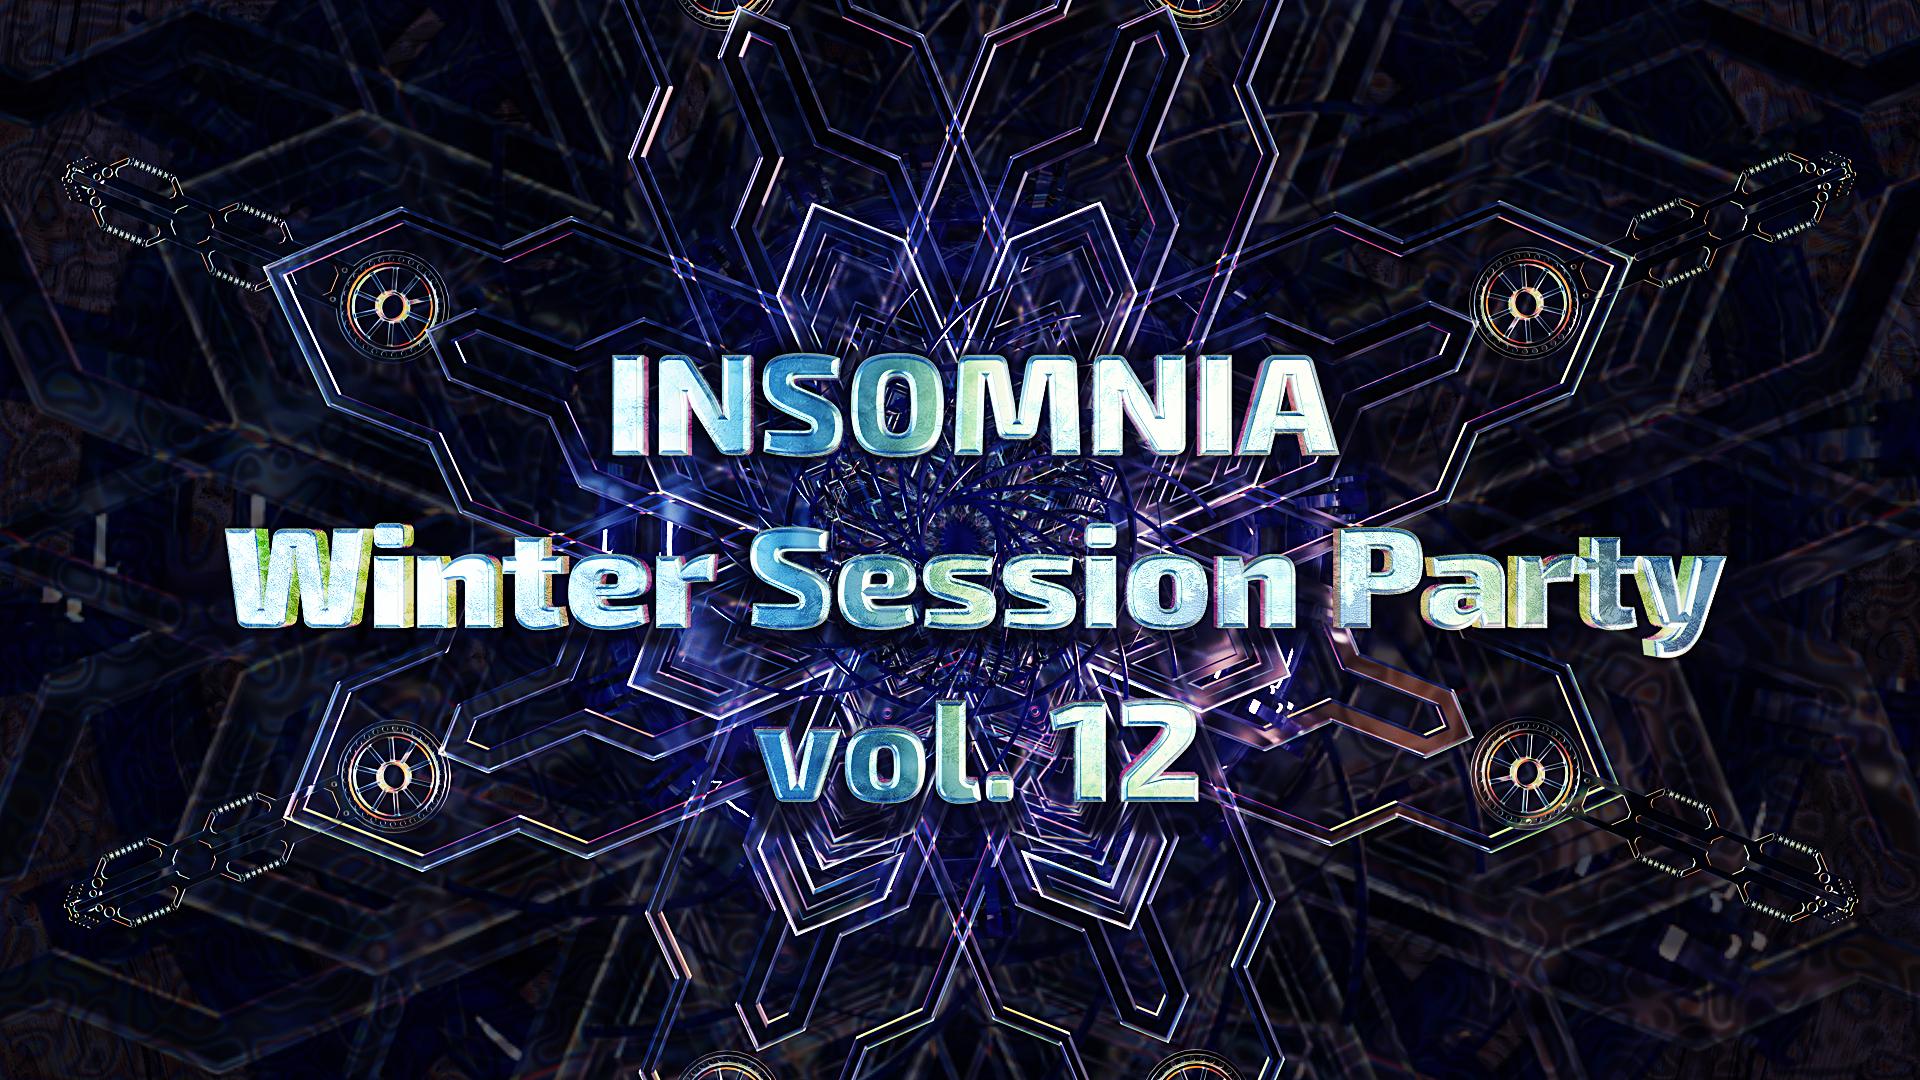 Insomnia Winter Session Party vol.12